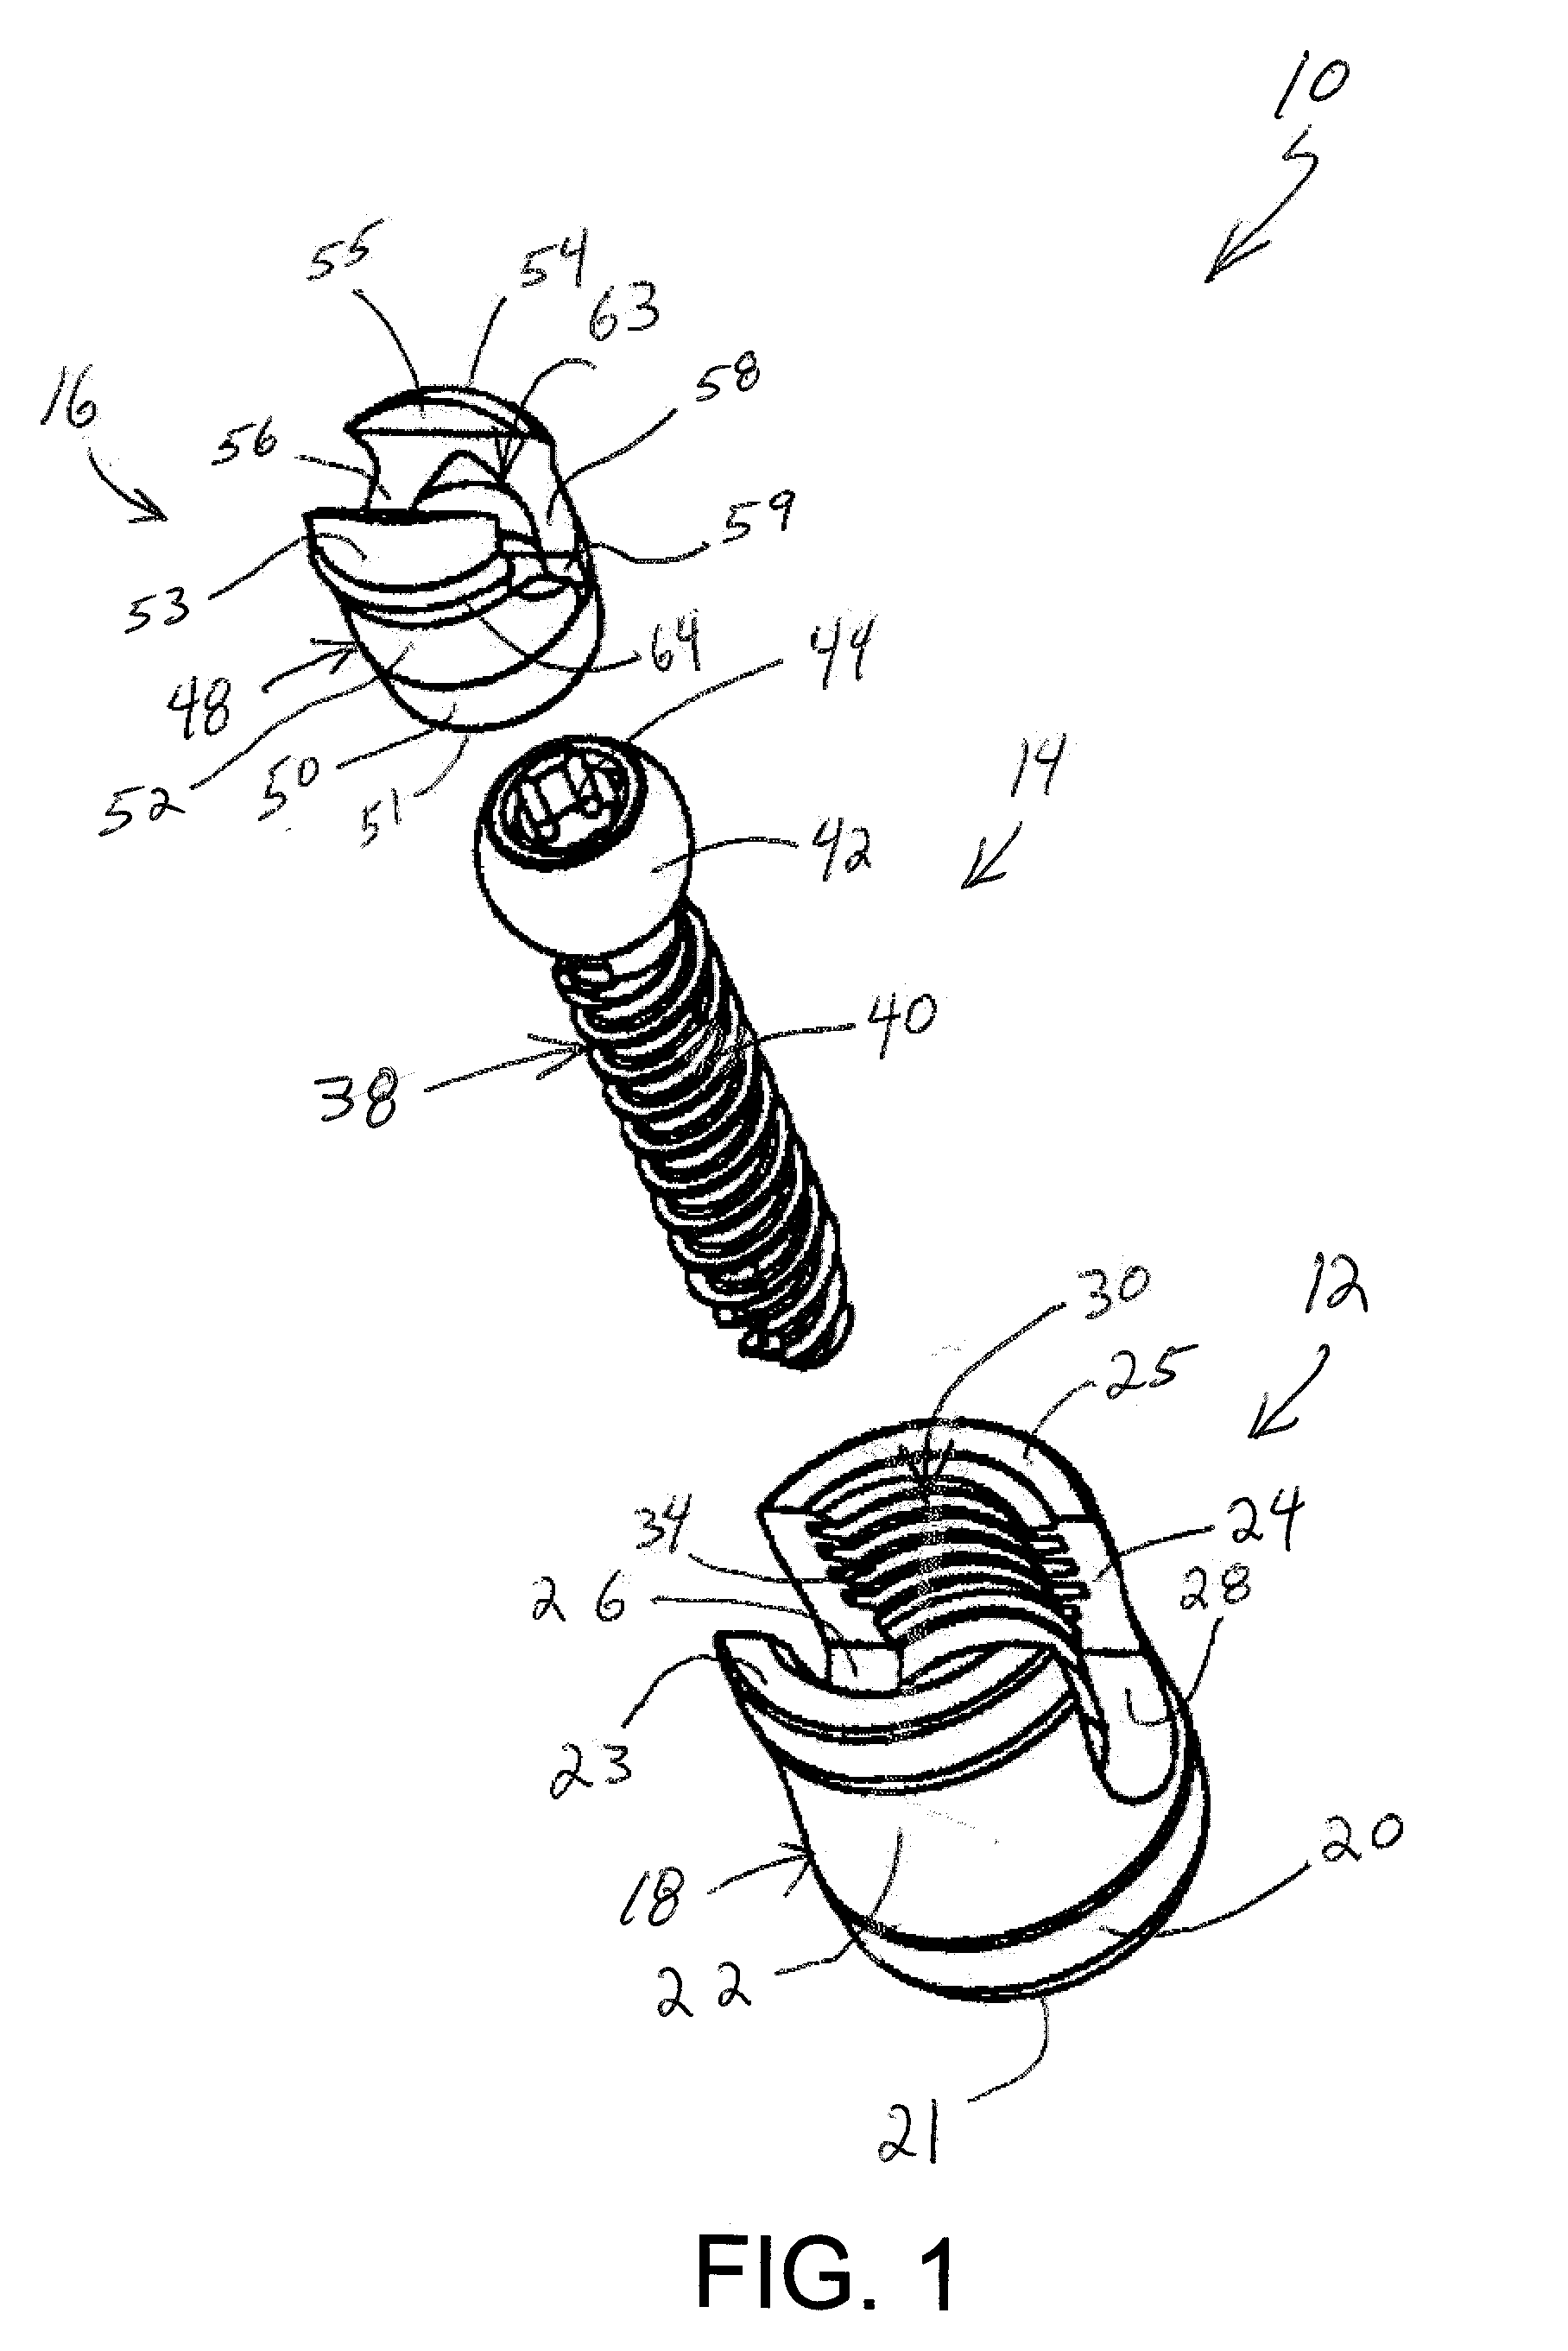 Top Loading Polyaxial Spine Screw Assembly With One Step Lockup